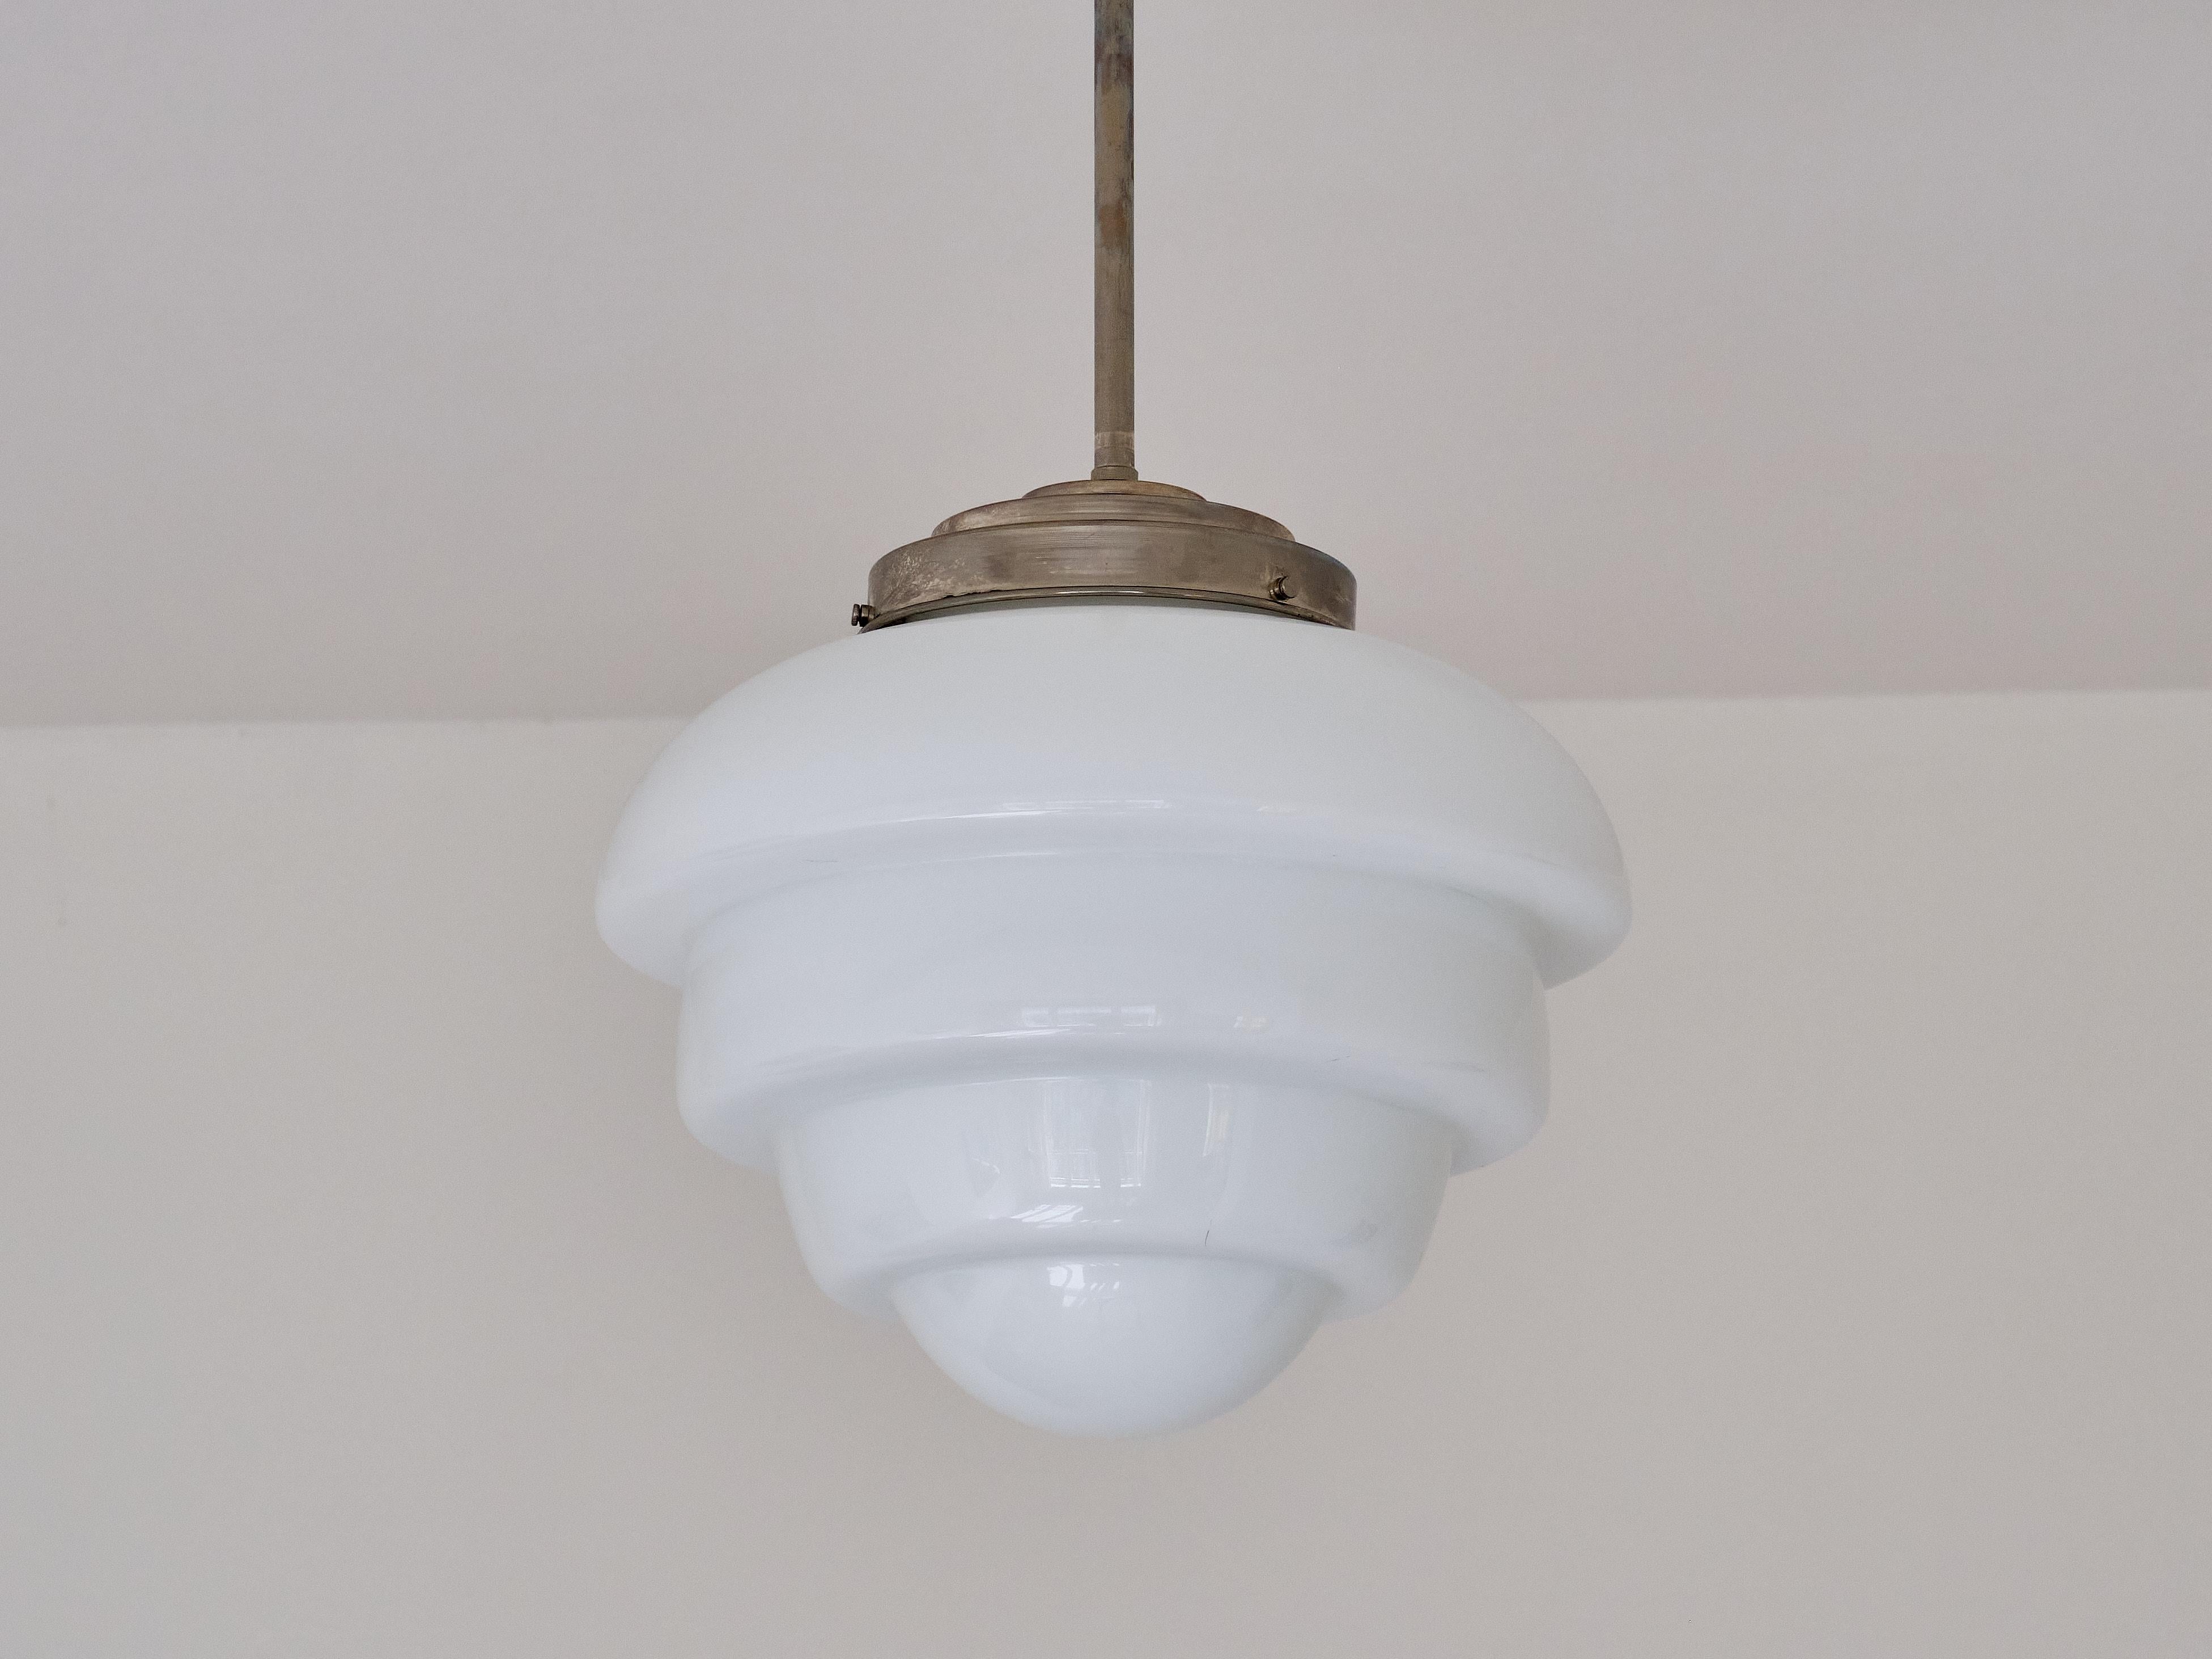 This rare pendant light was in The Netherlands in the 1930s. The striking shade is in a downwards muli-tiered artichoke shape. The shade is made of a slightly glossy, white opaline glass. The shade is attached to the fixture in nickel with a